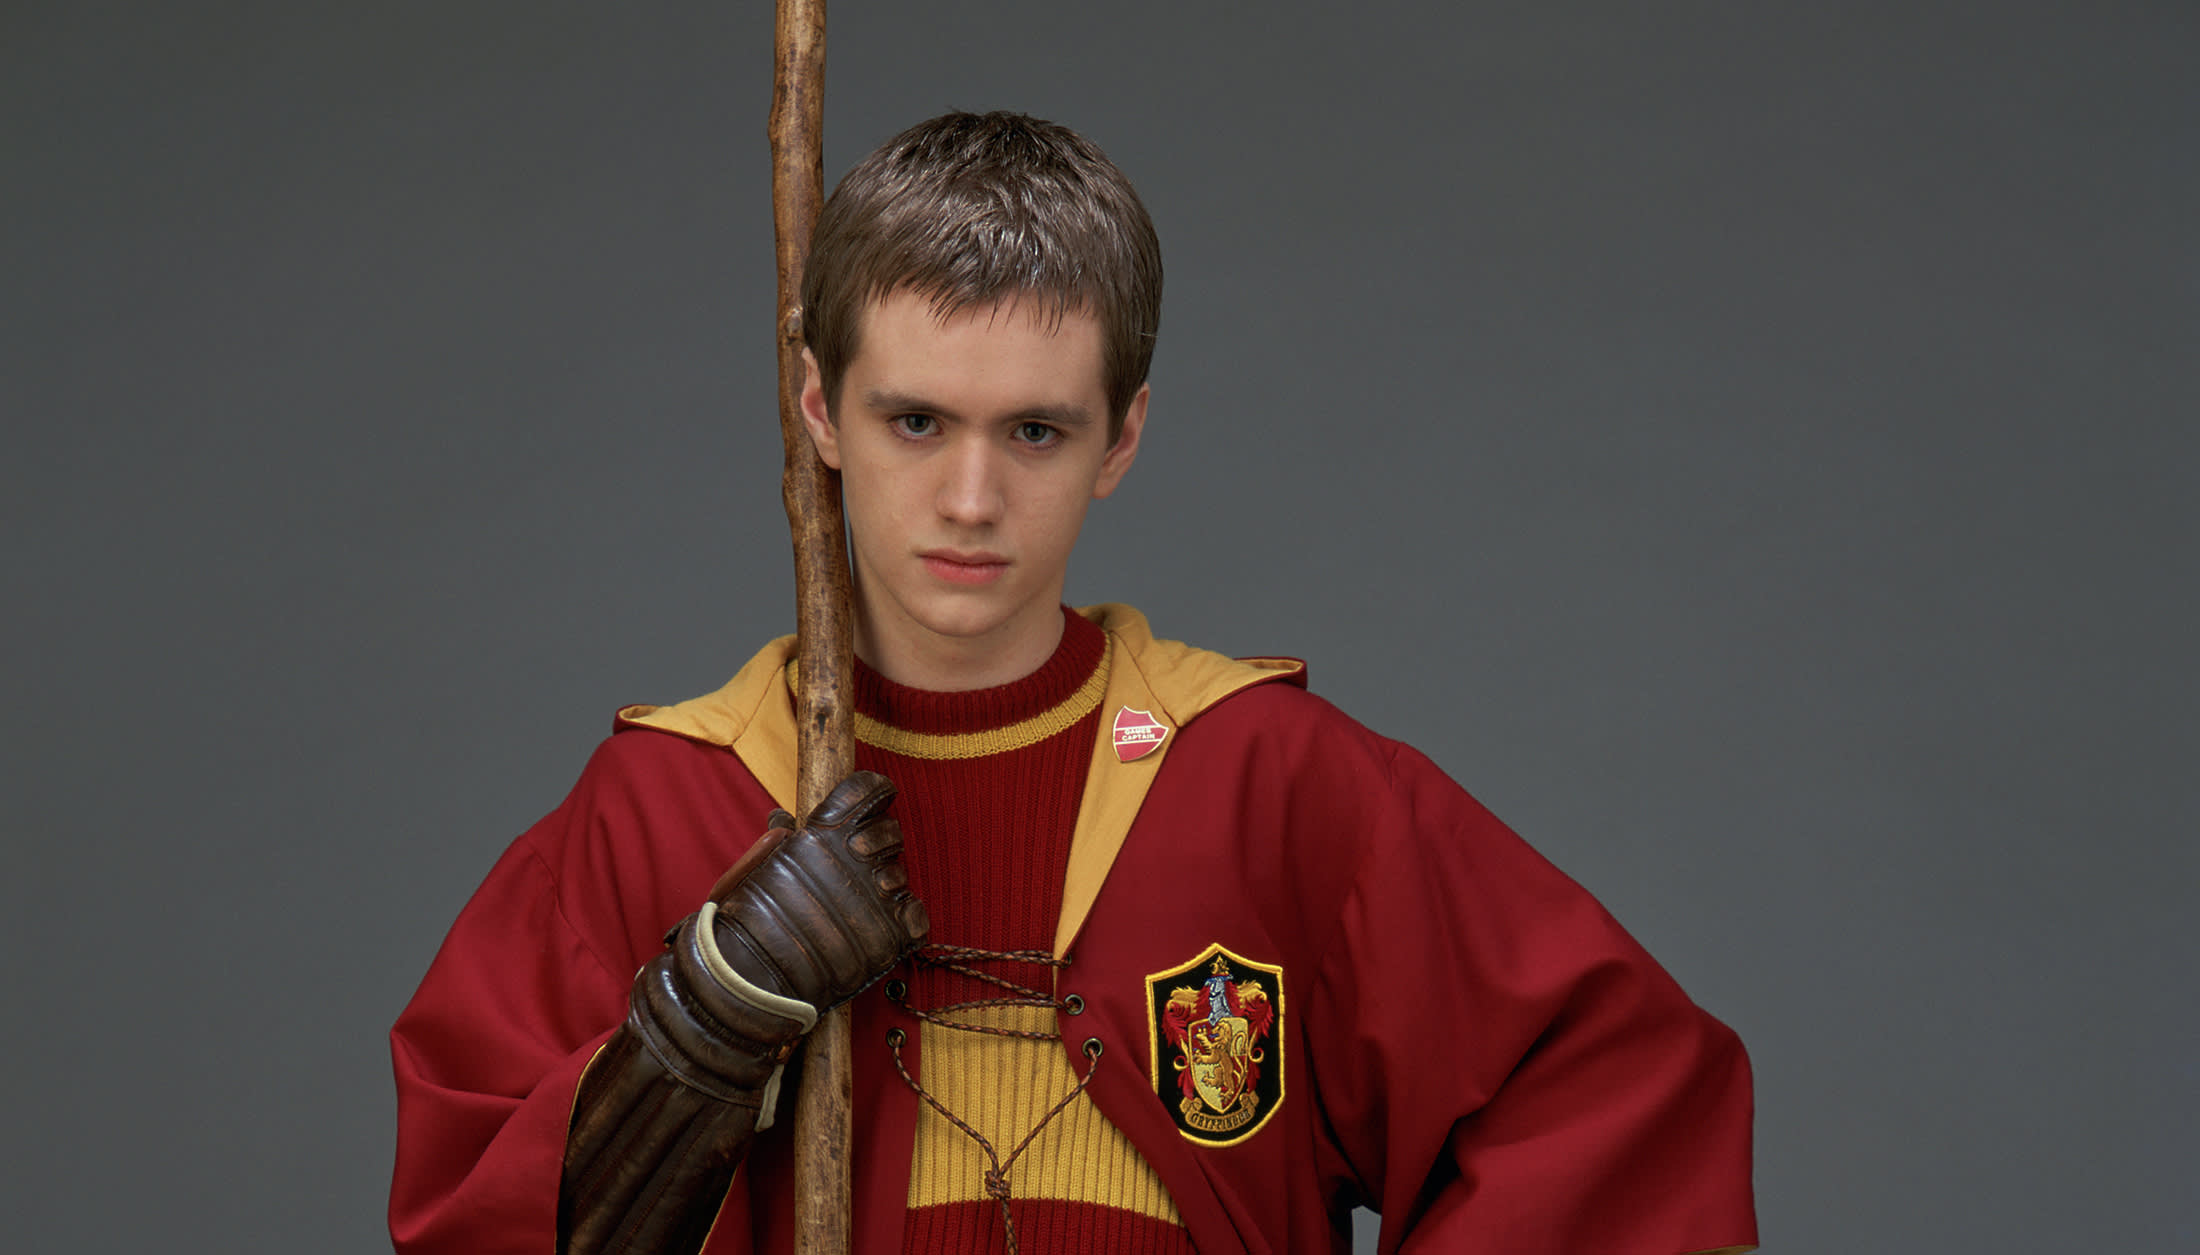 Oliver Wood Character Analysis: Gryffindor Quidditch Captain